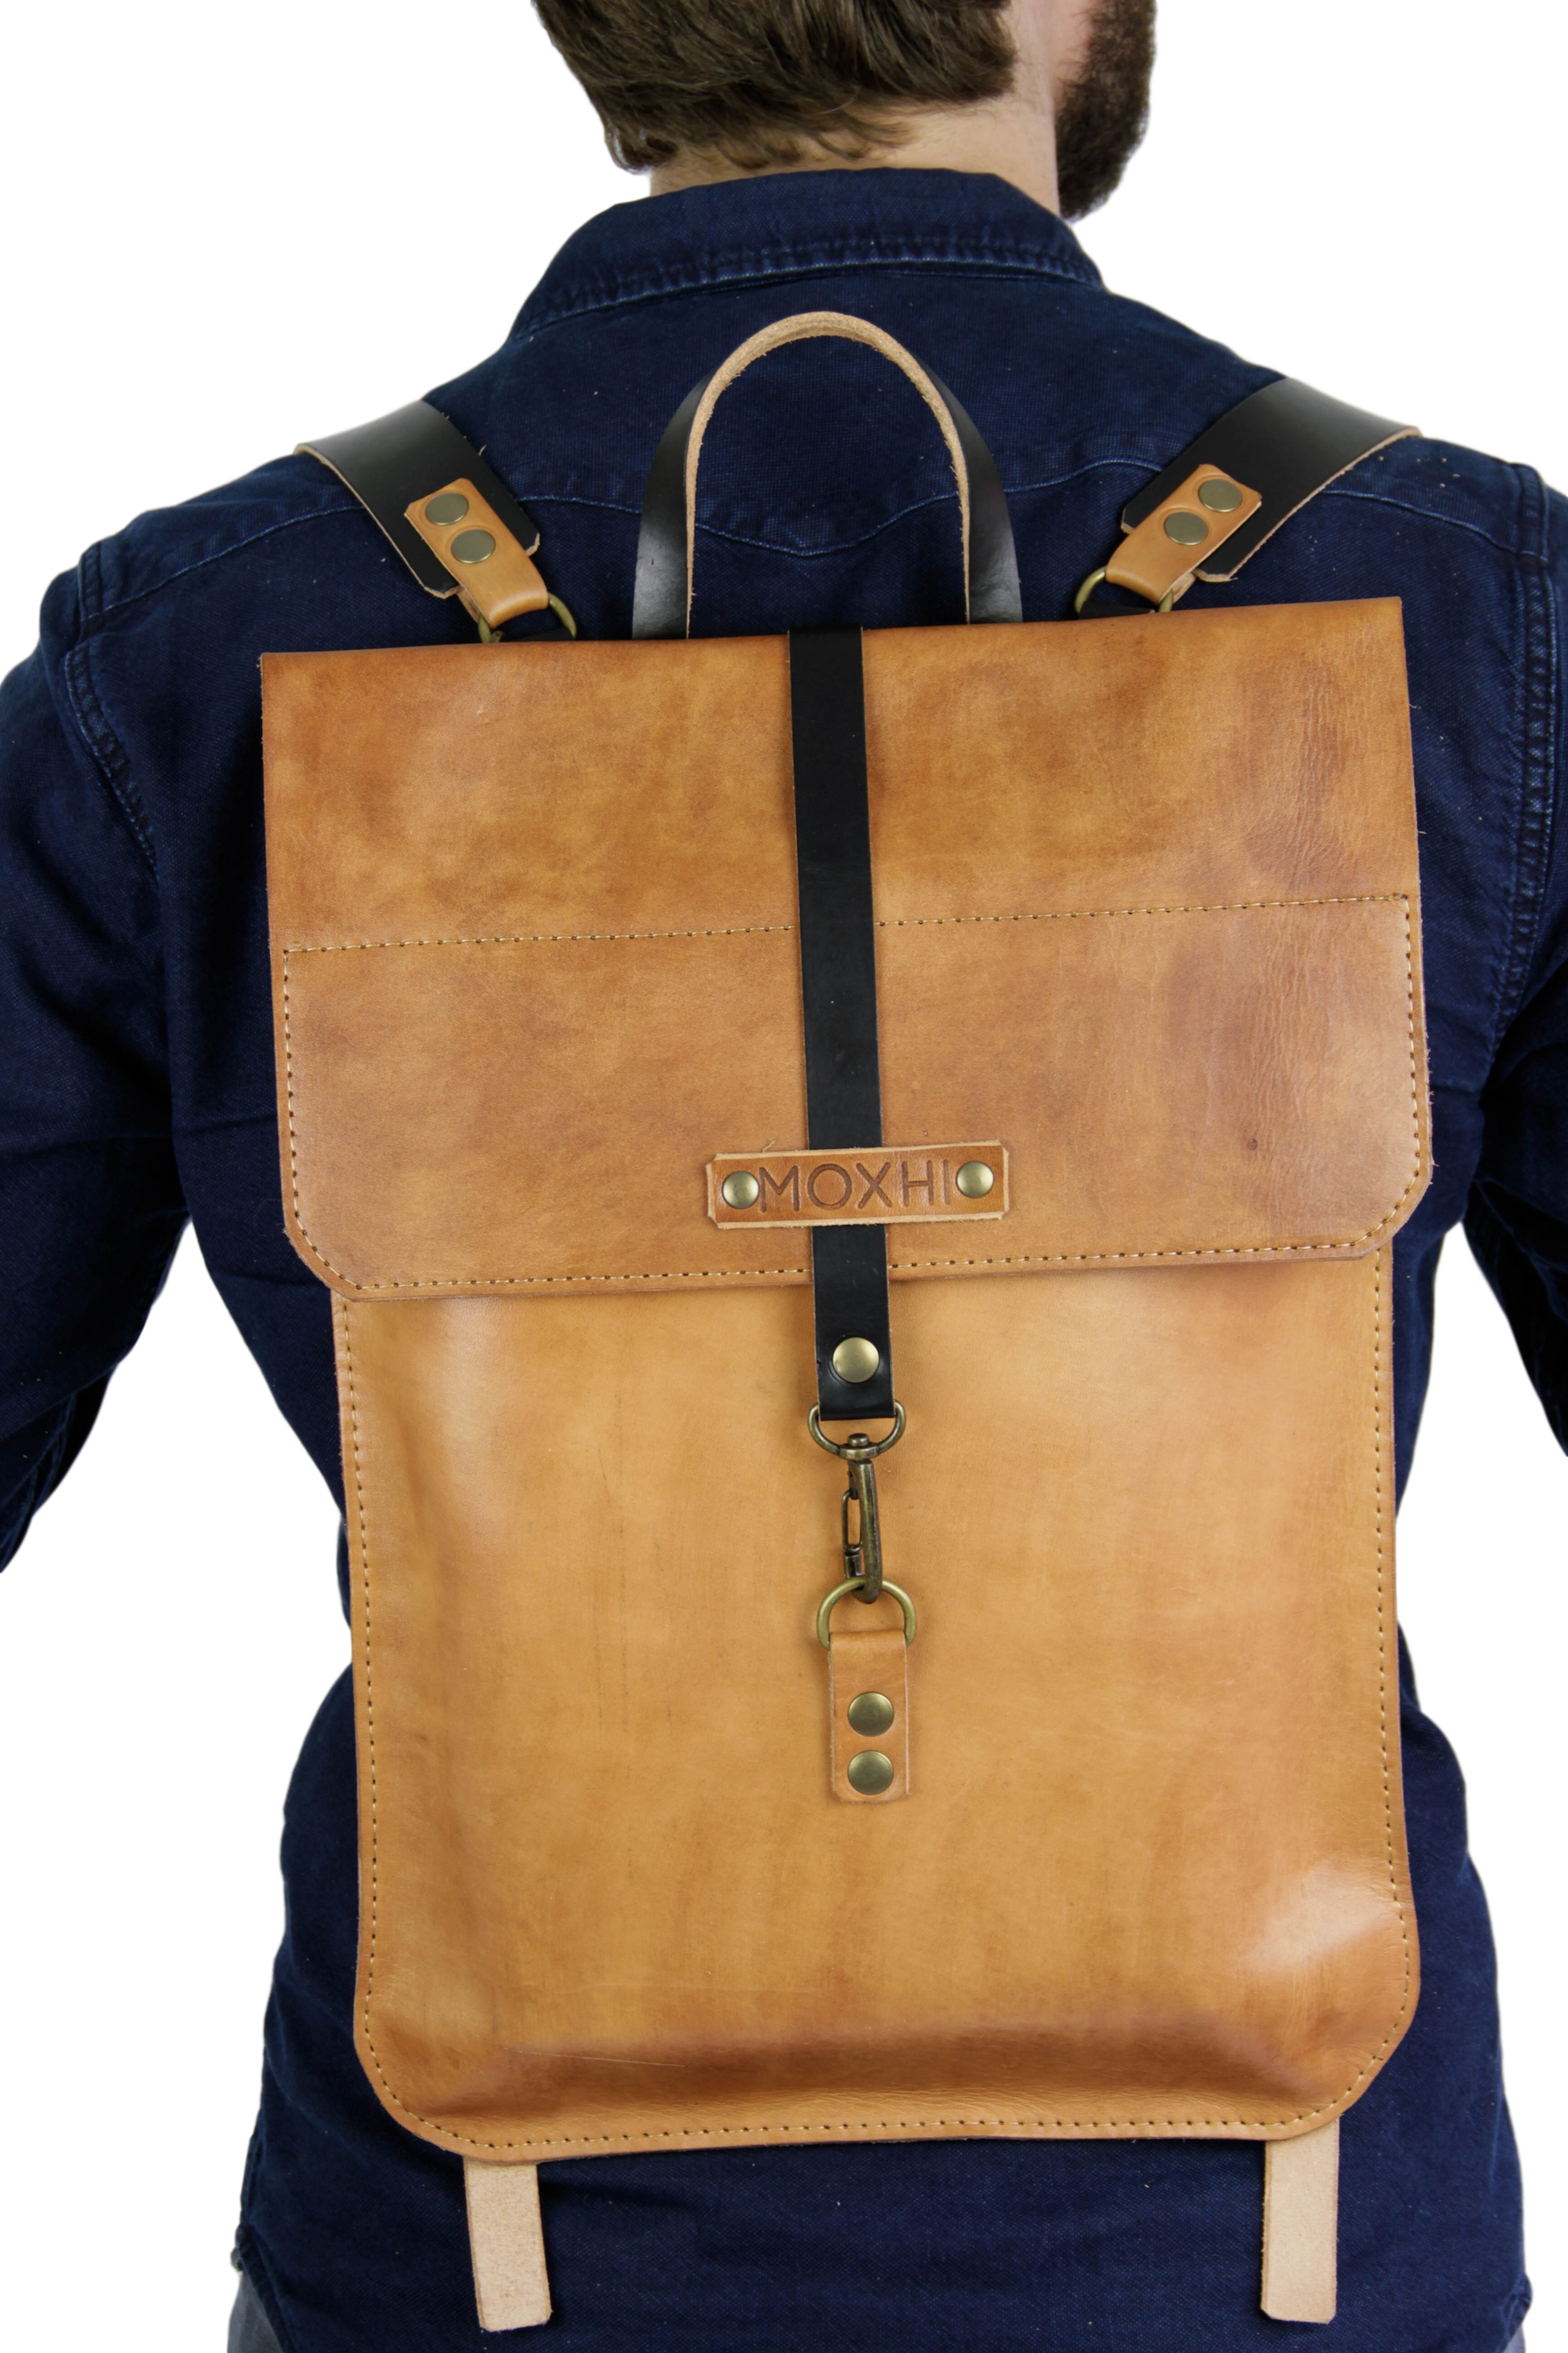 Handcrafted leather laptop bag backpack